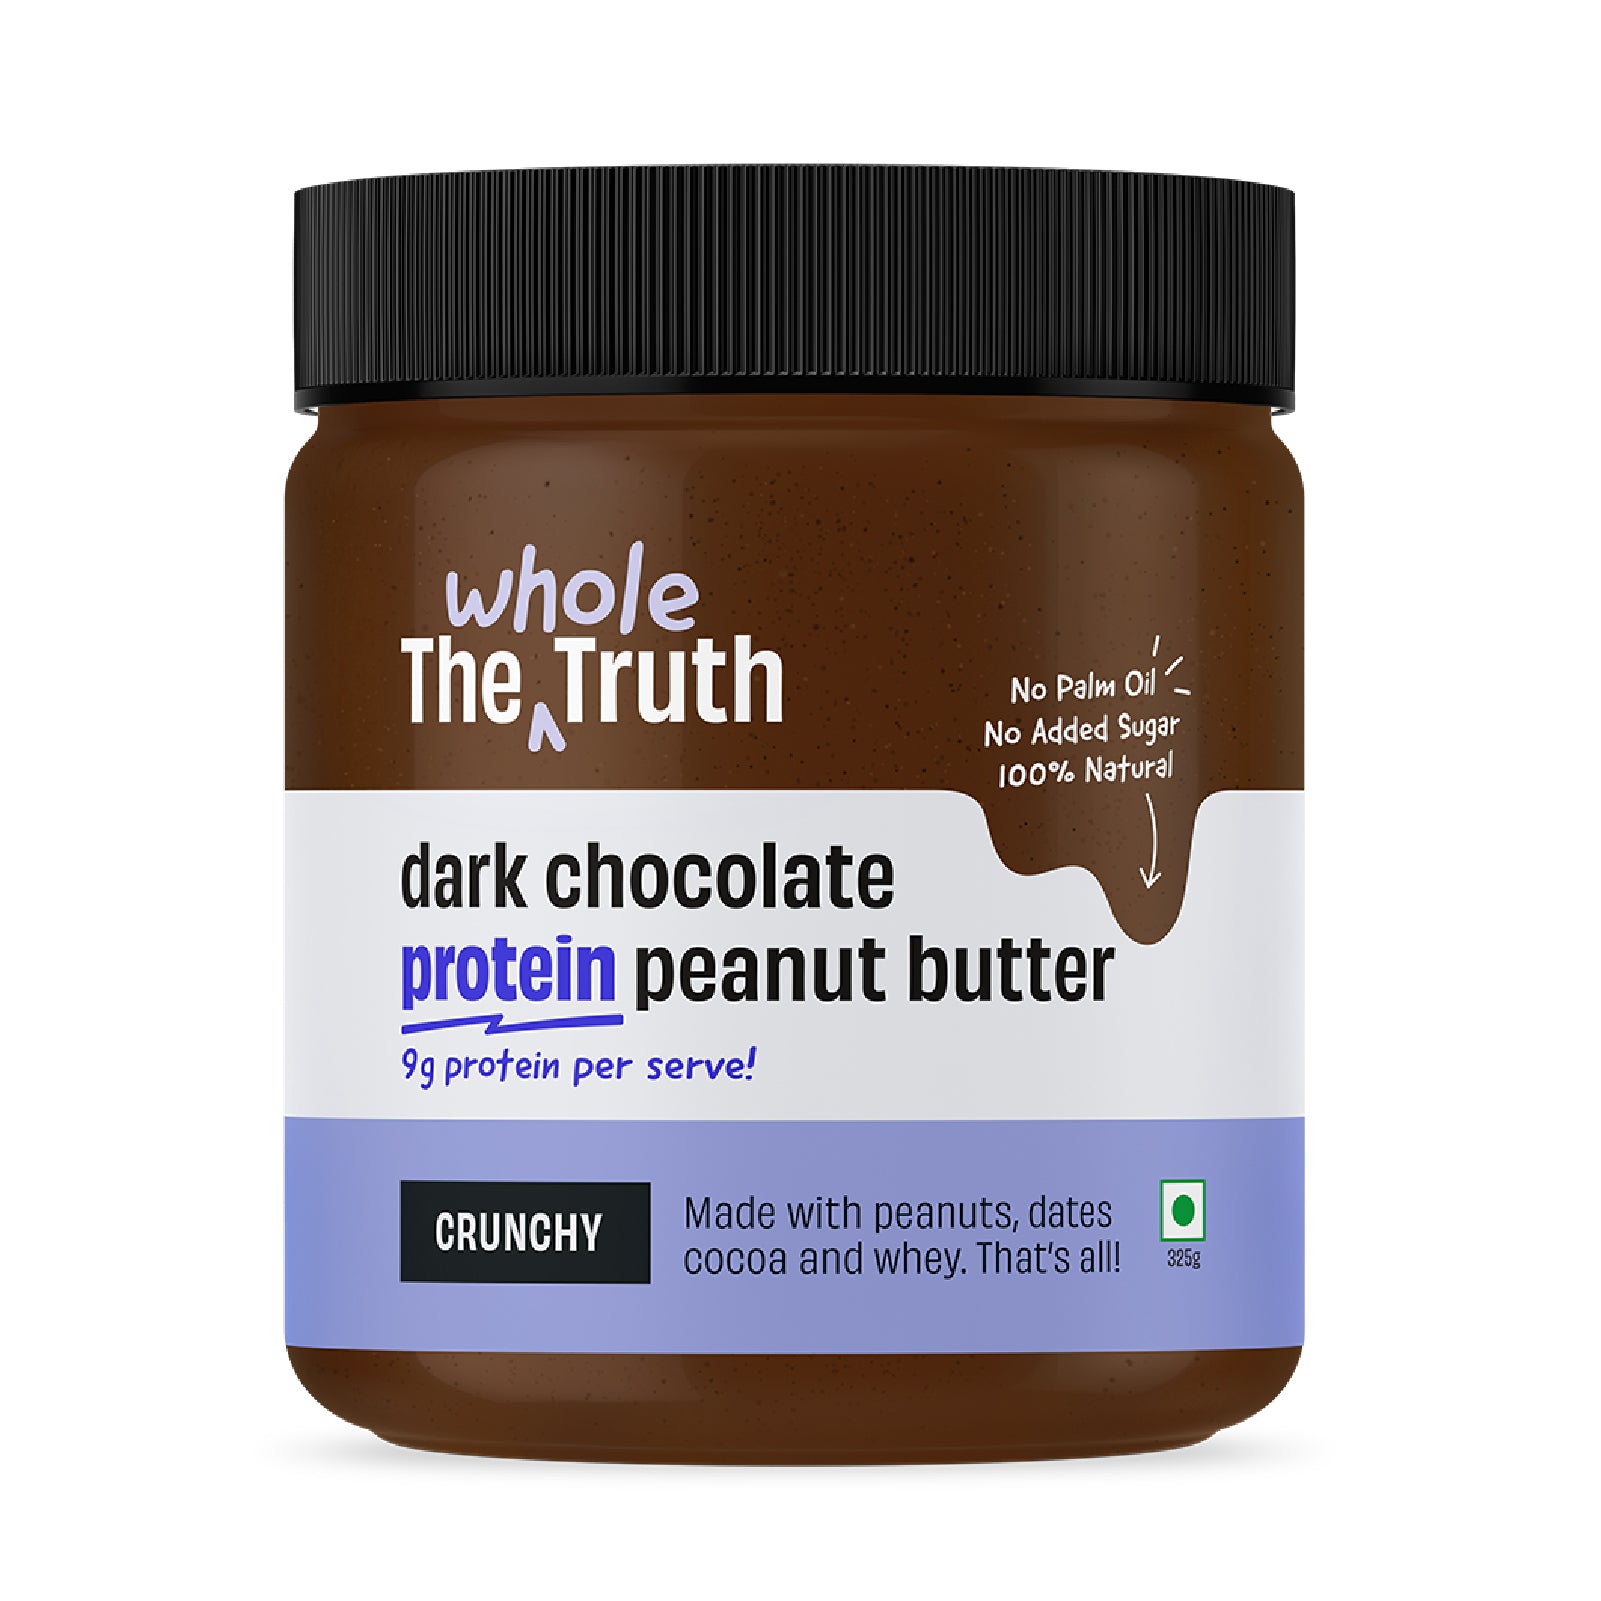 The Whole Truth - Dark Chocolate Protein Peanut Butter - Crunchy | All Natural | Gluten Free | 325g